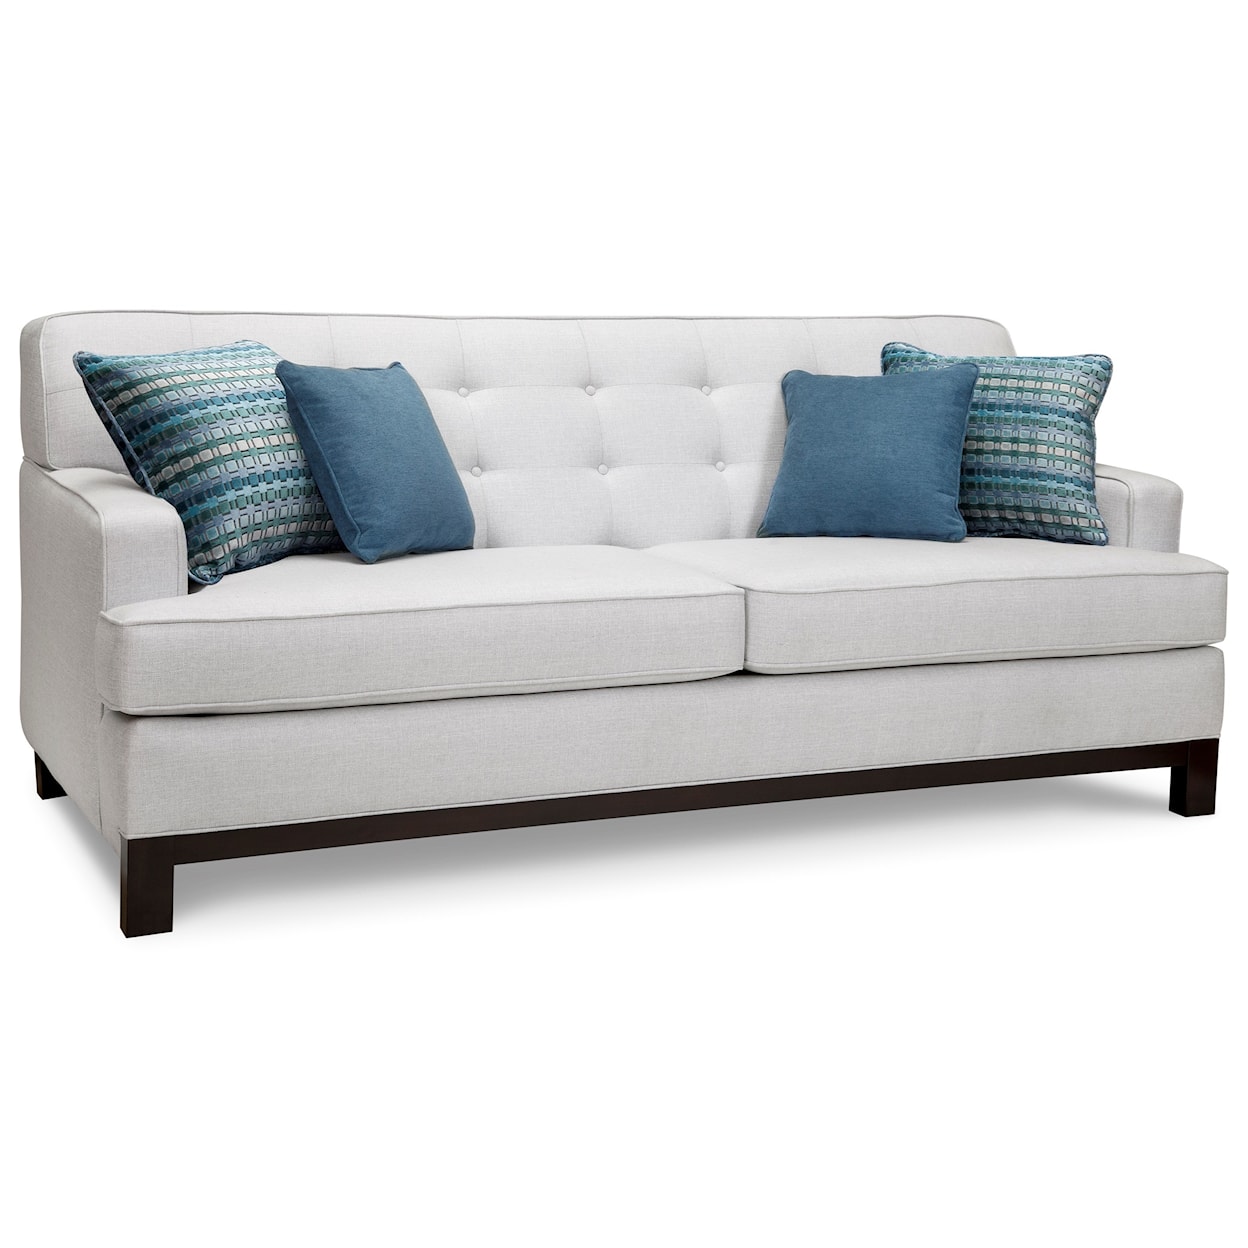 Superstyle 9678 Sofa